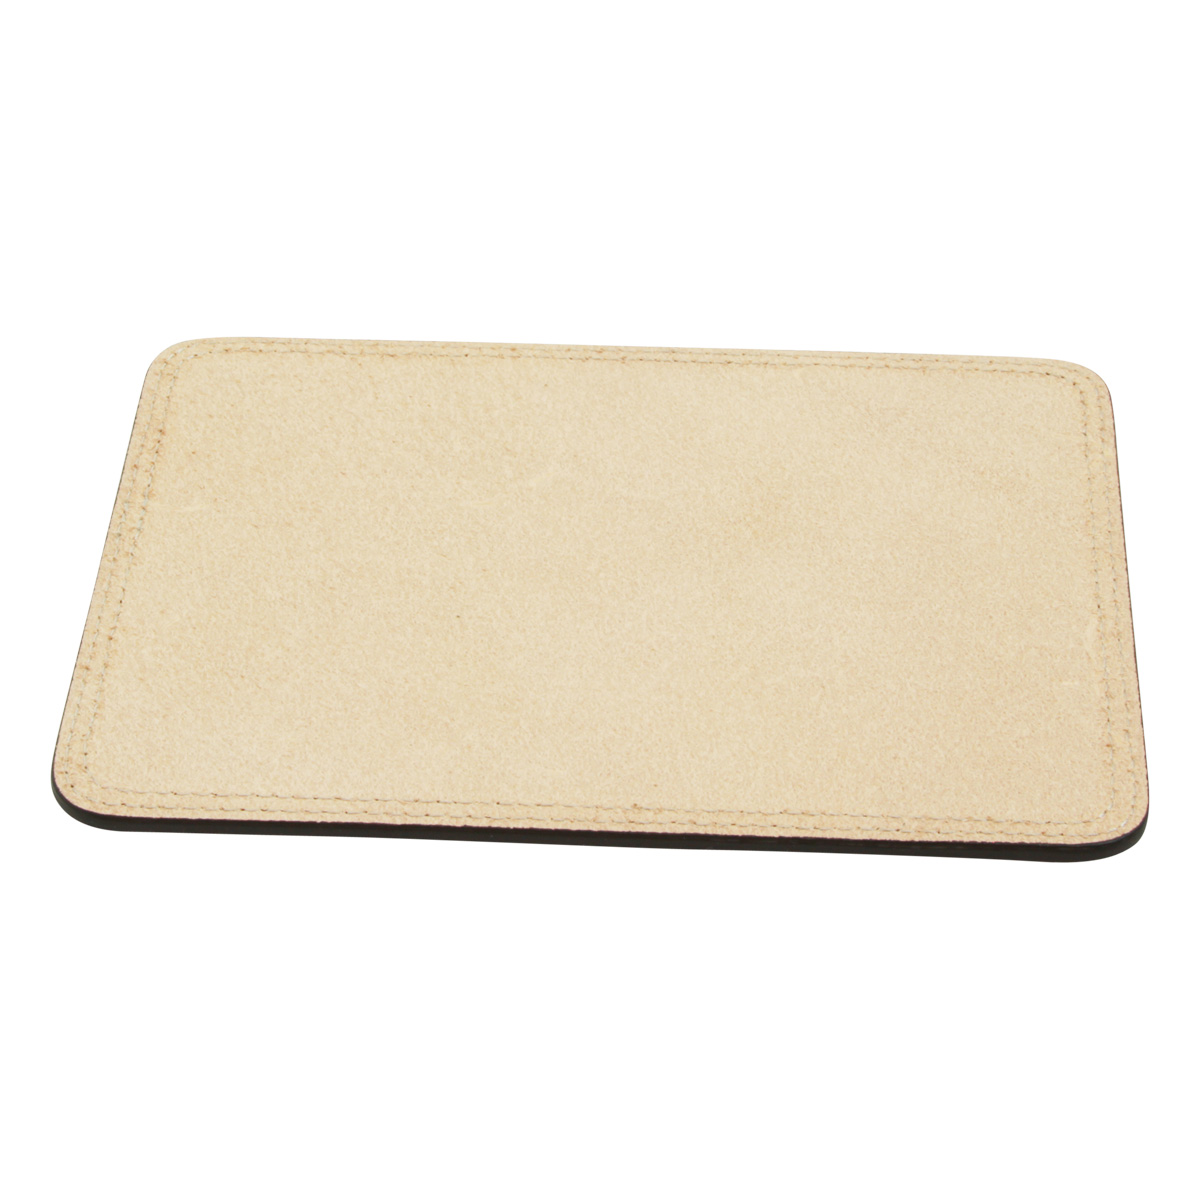 Leather mouse pad |761089CB|Old Angler Firenze